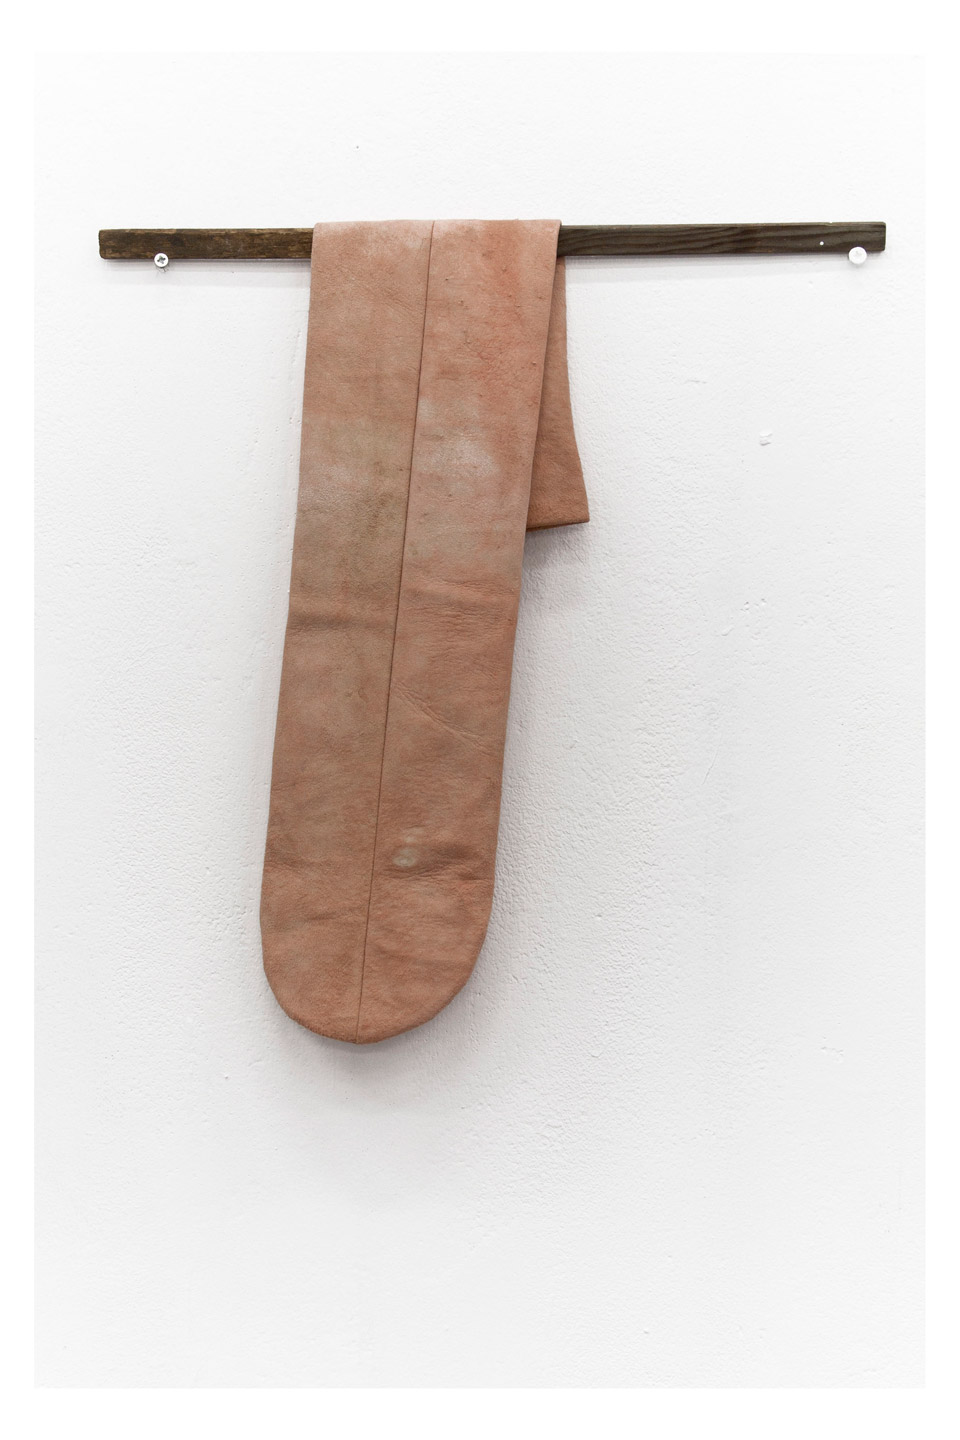 <p>Hung Out, 2013, wood, leather, screws, wall paint, 42 x 35 x 2 cm</p>